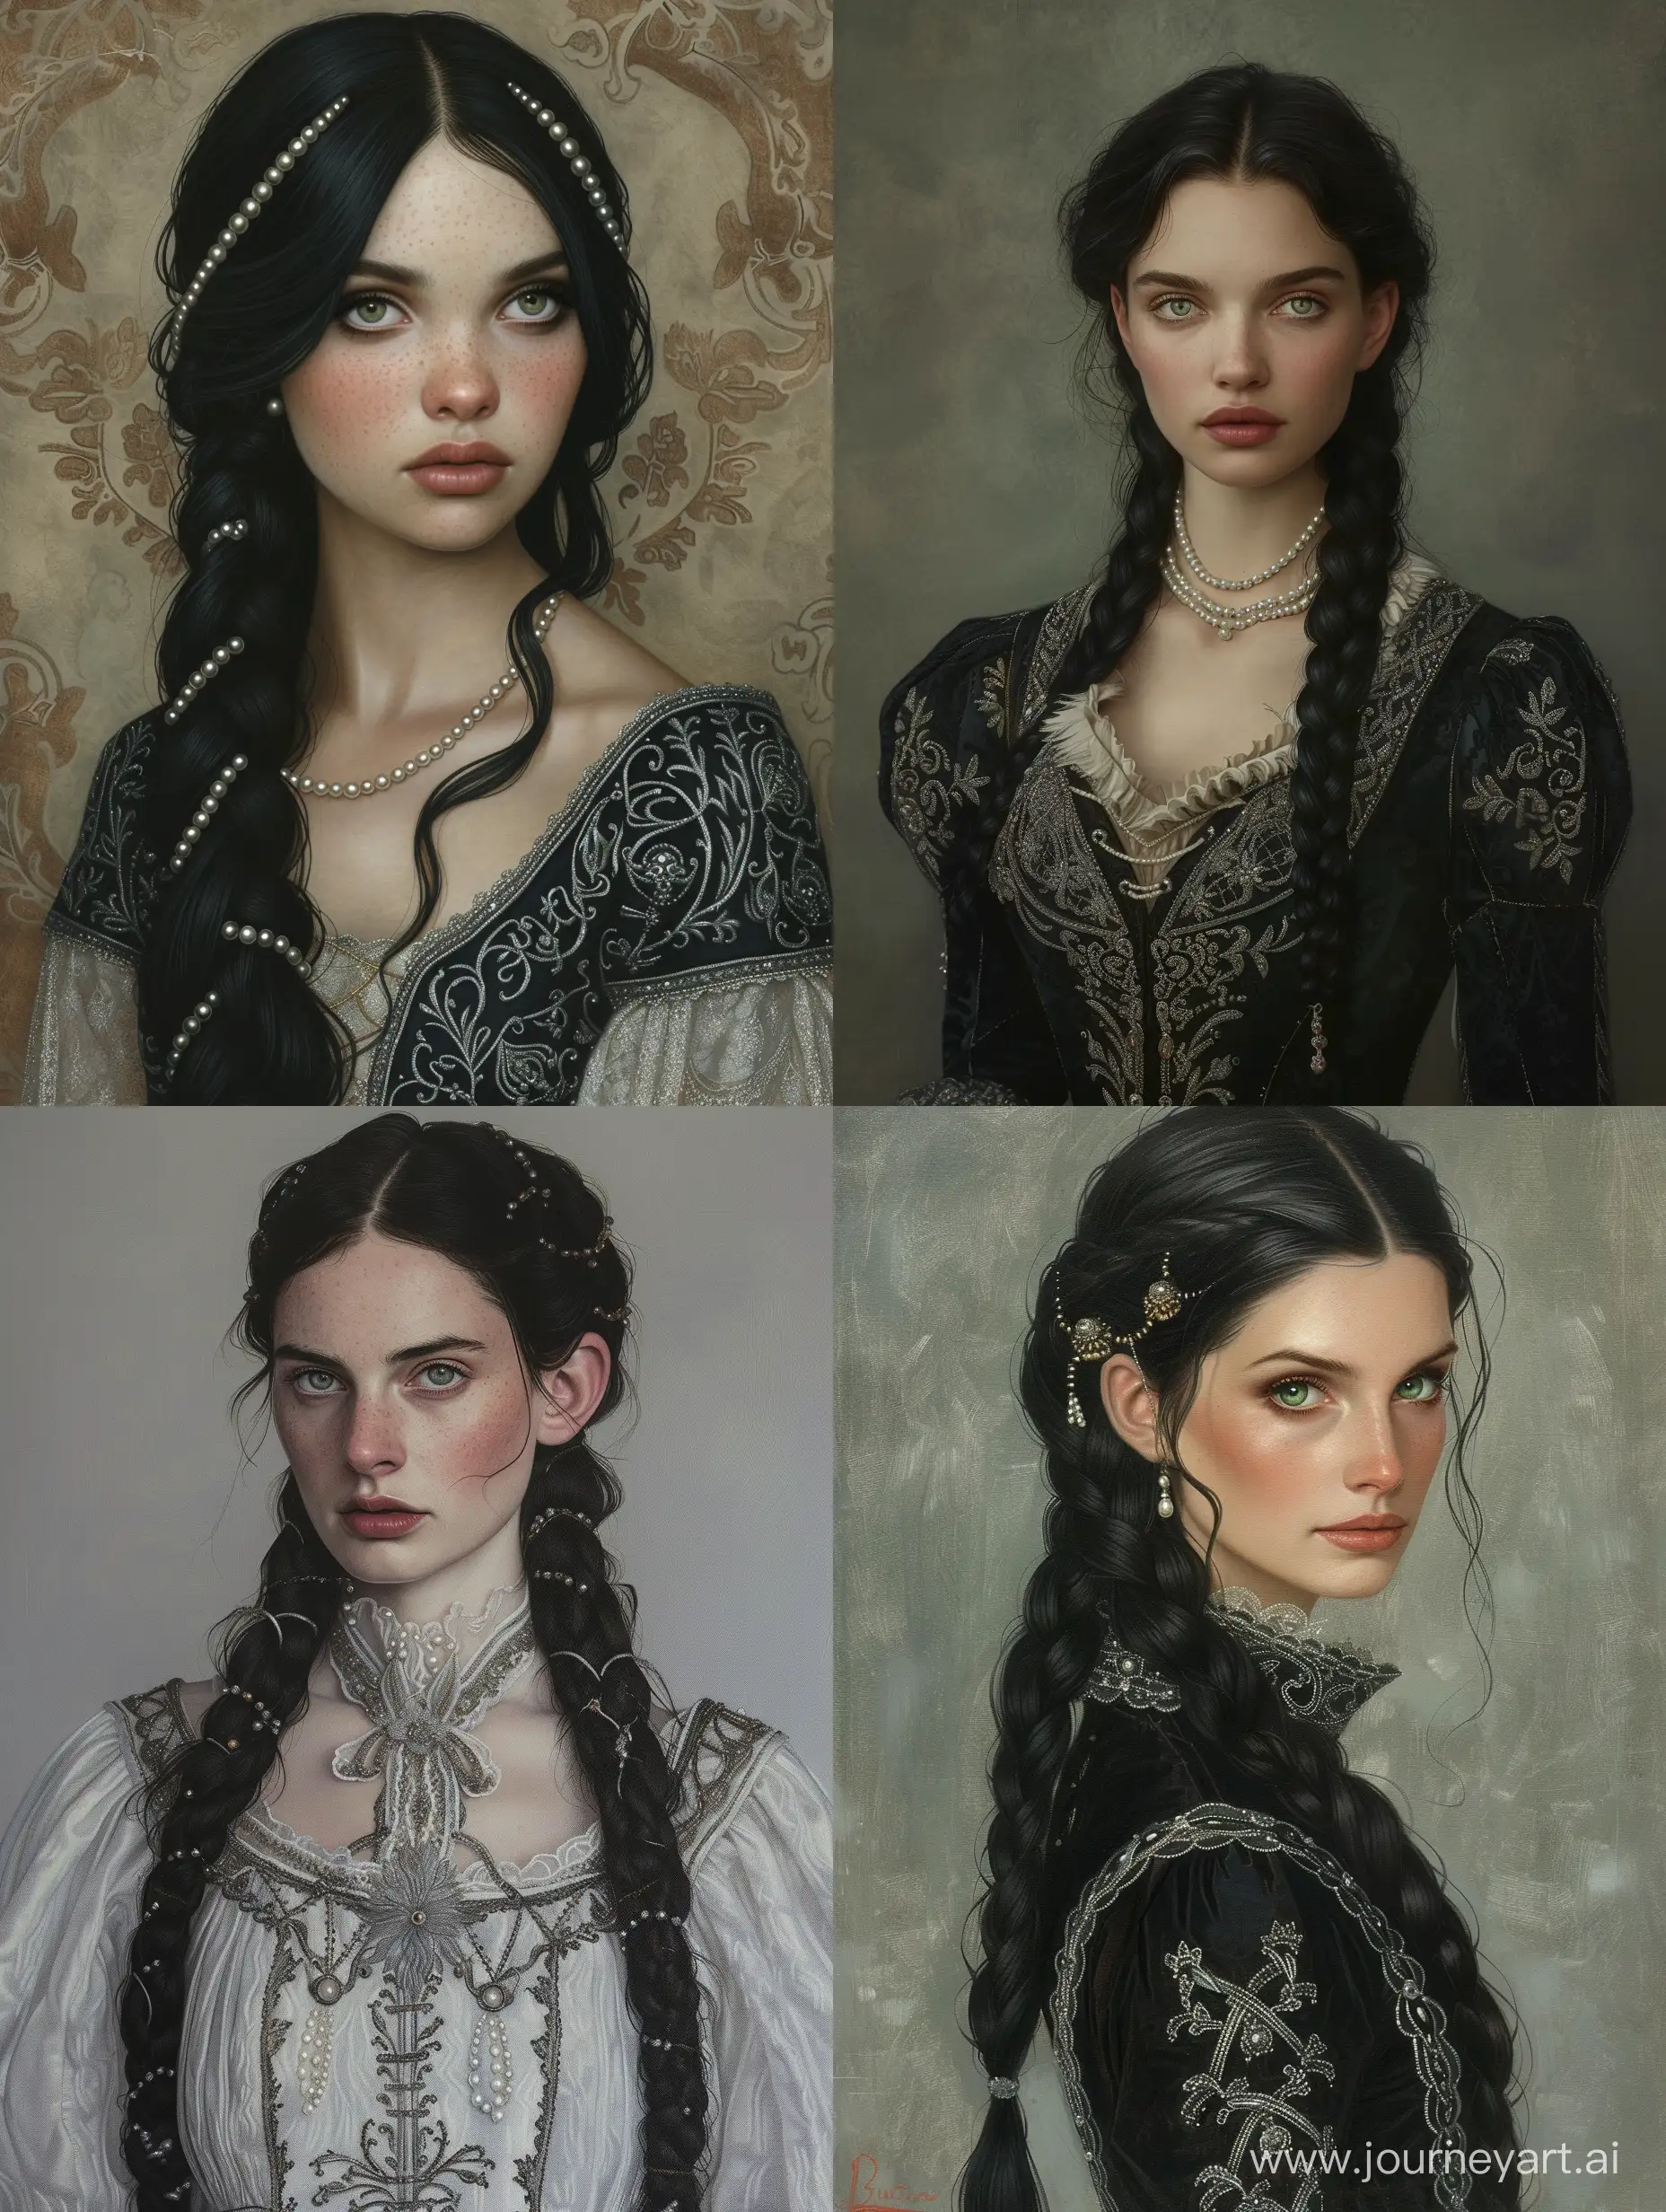 Elegant-Duchess-with-RavenBlack-Hair-and-Intricate-Silver-Embroidery-in-Oil-Portrait-Style